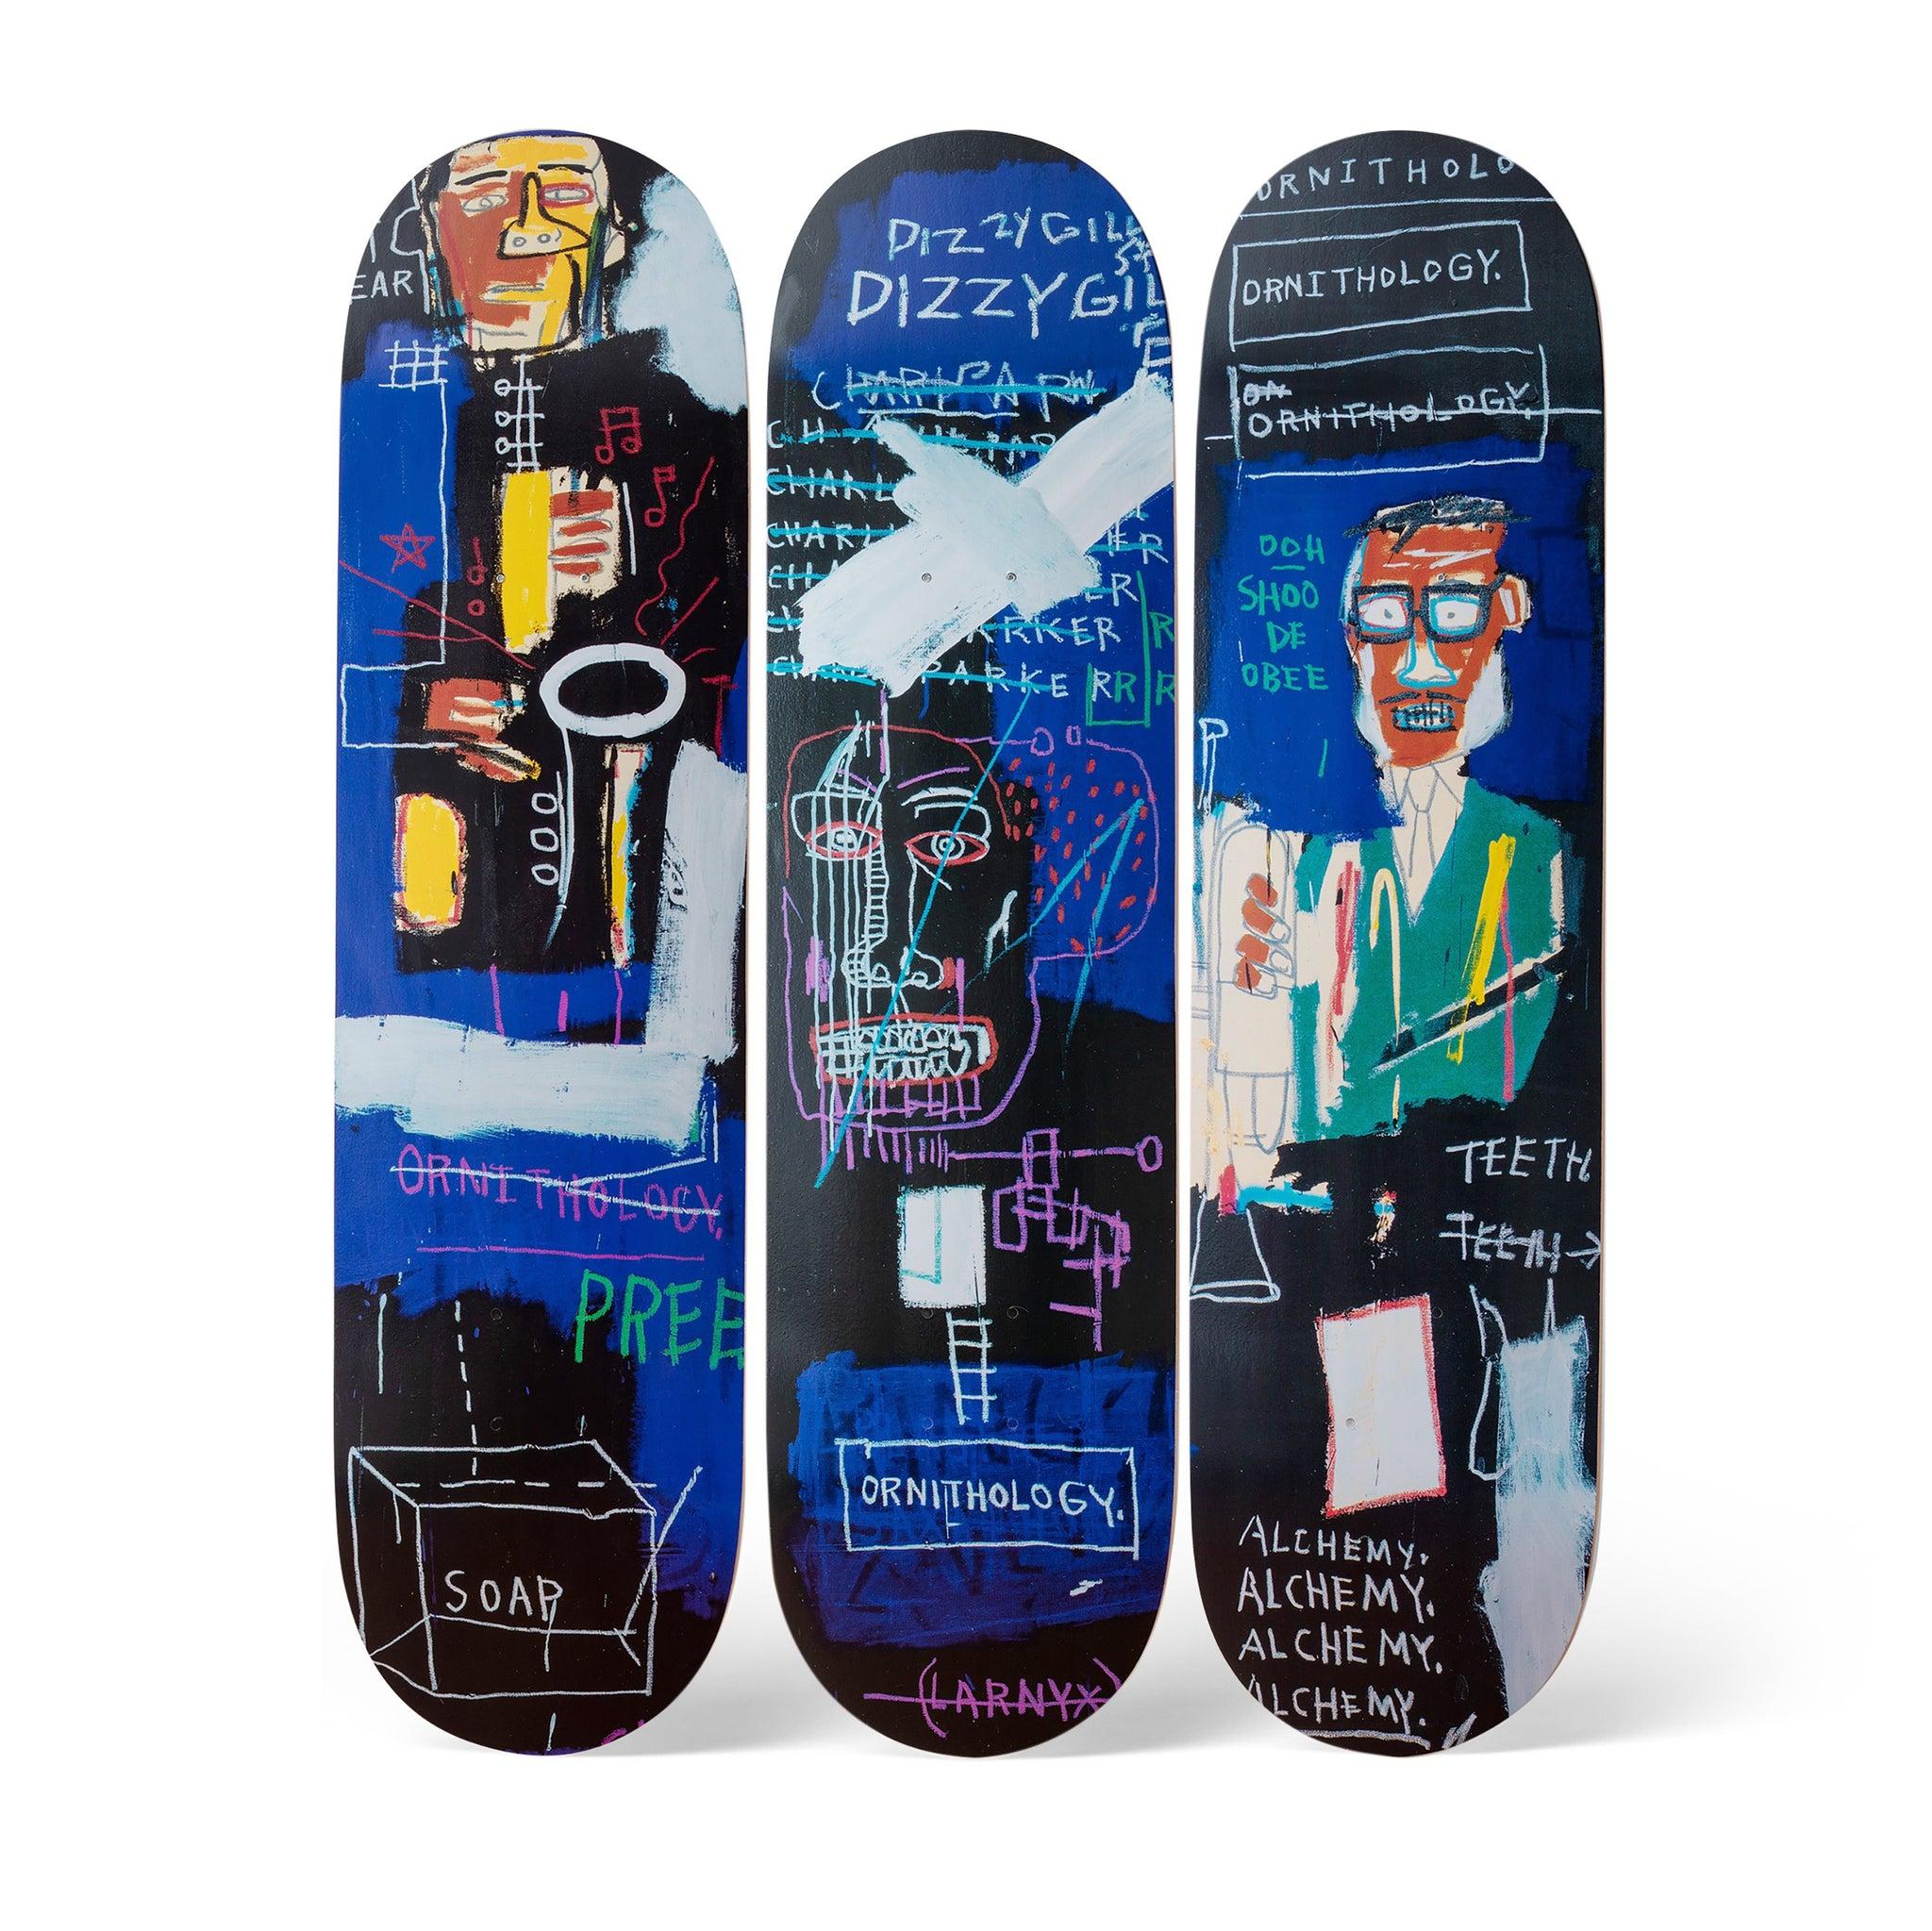 Basquiat Skate Deck Set :
Skateboard Deck Triptych sous licence de l'Estate of Jean Michel Basquiat in conjunction with Artestar c. 2017, featuring offset imagery of the much iconic early eighties work, Basquiat 